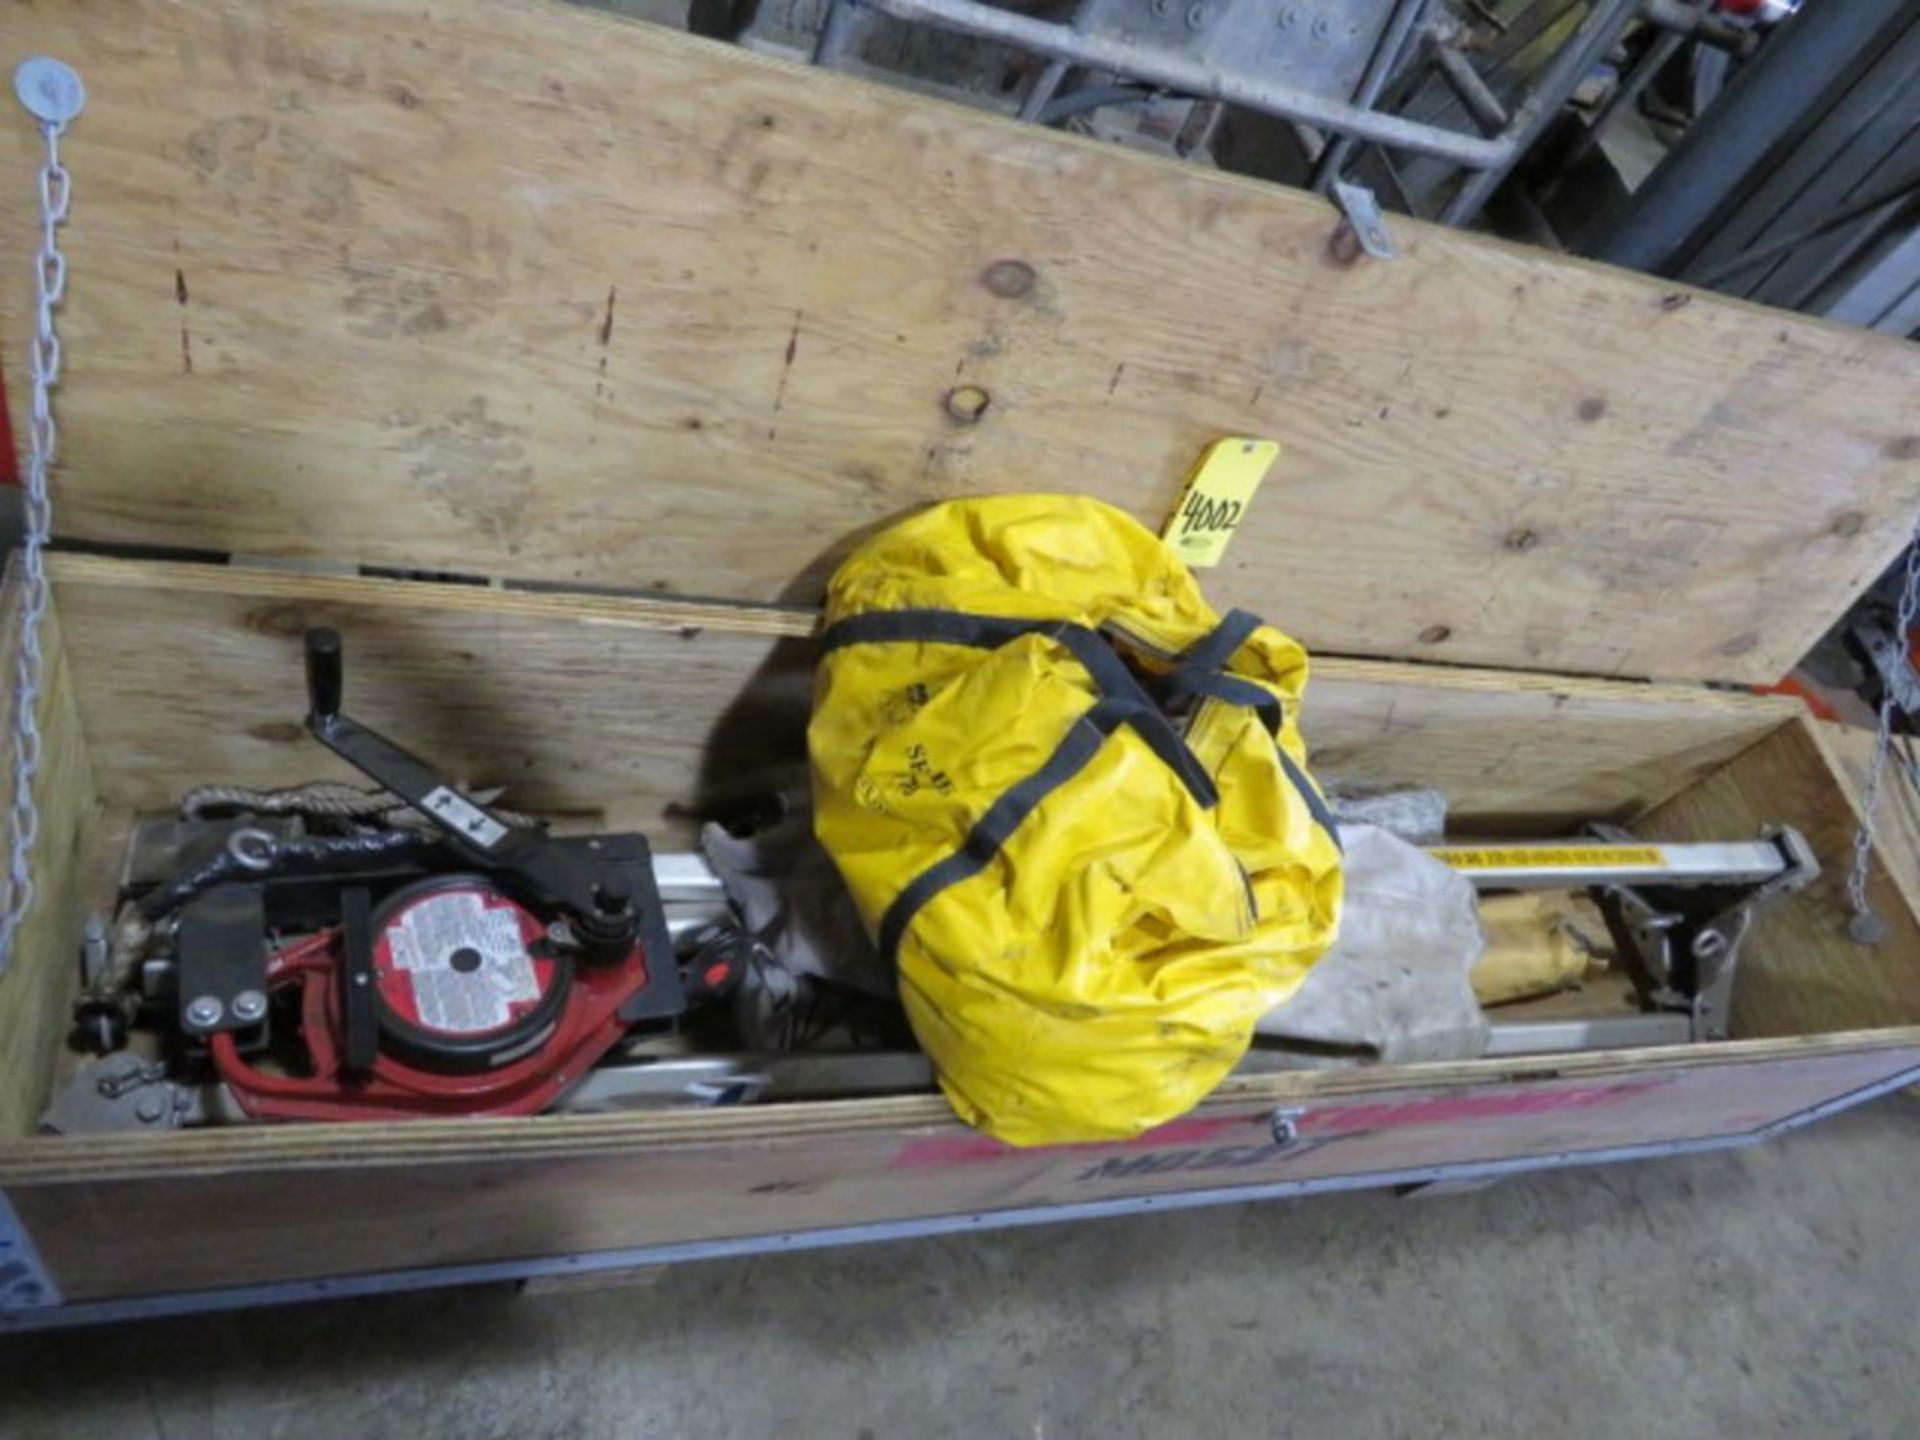 BOX WITH CONFINED SPACE GEAR